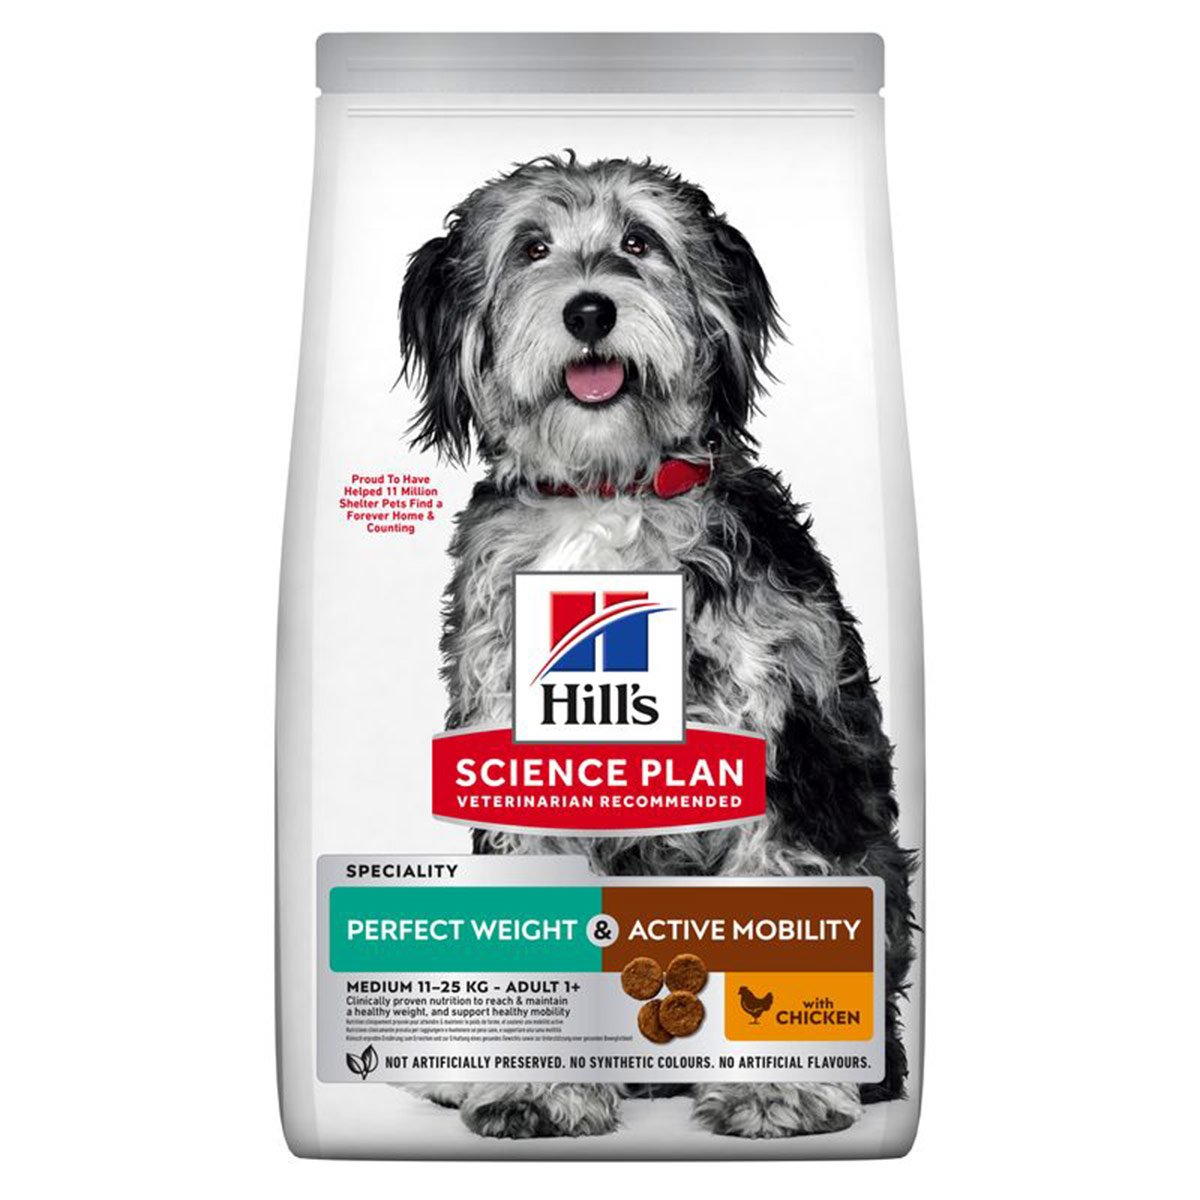 Hill's Science Plan Hund Perfect Weight + Active Mobility Medium Adult Huhn 2,5kg von Hill's Science Plan